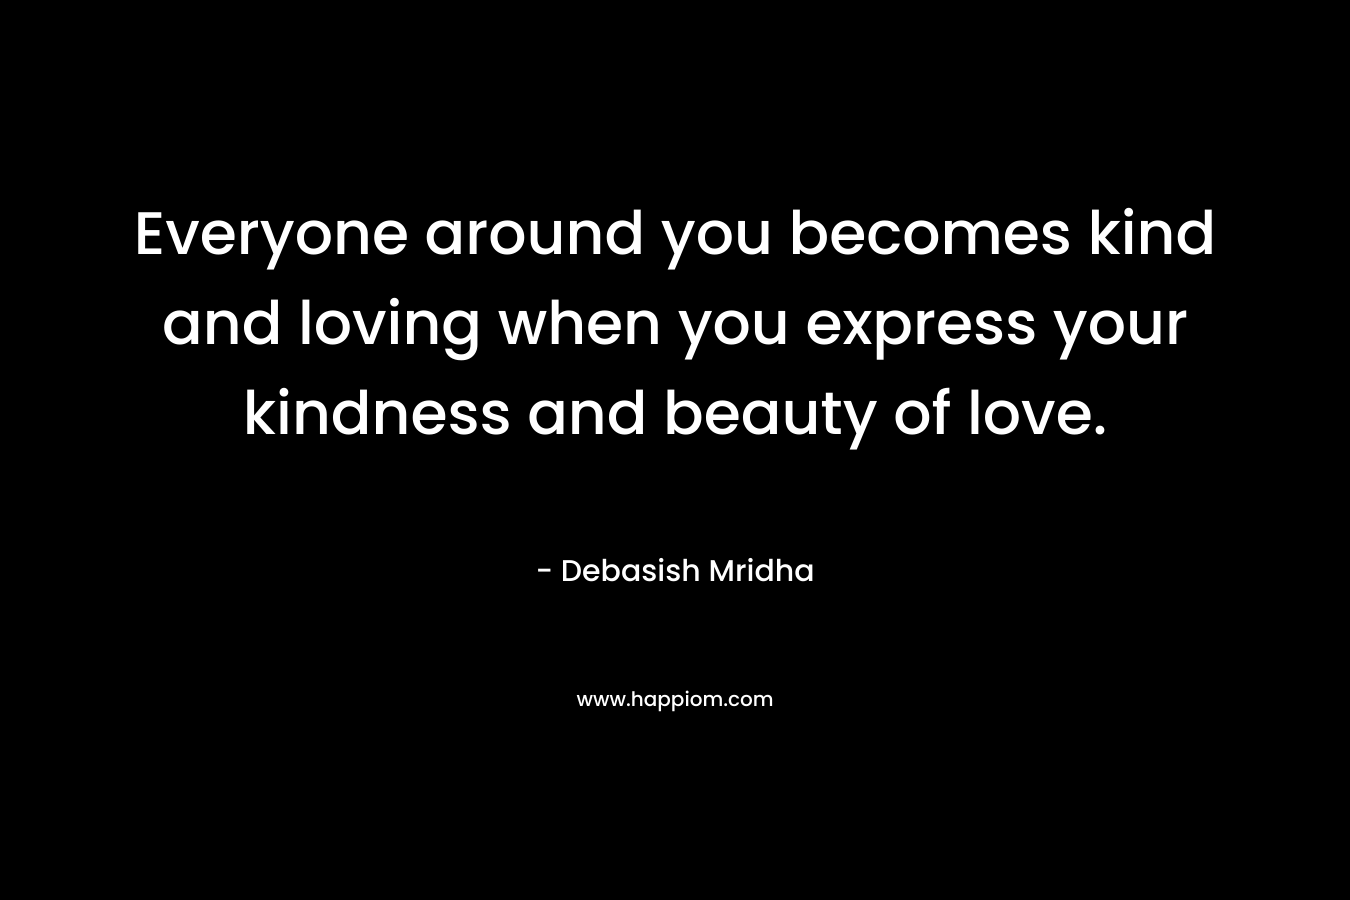 Everyone around you becomes kind and loving when you express your kindness and beauty of love.